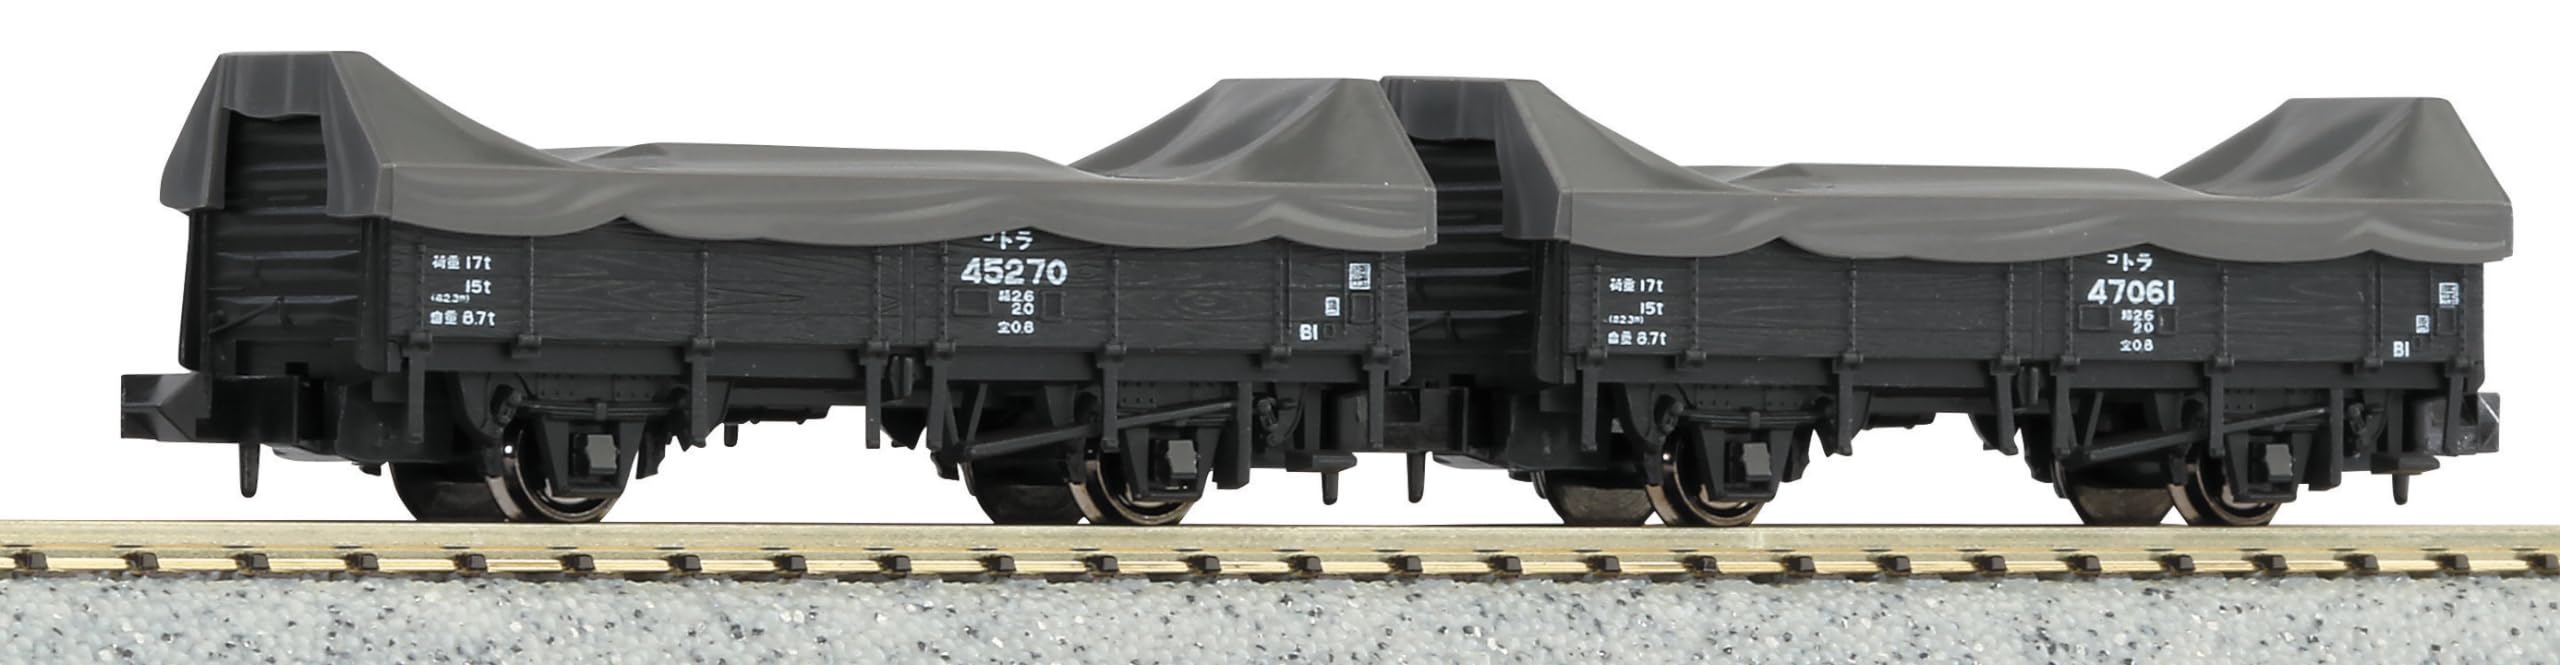 Kato N Gauge Tora 45000 Railroad Model - 2 Cars Freight Car with Cargo 8027-1